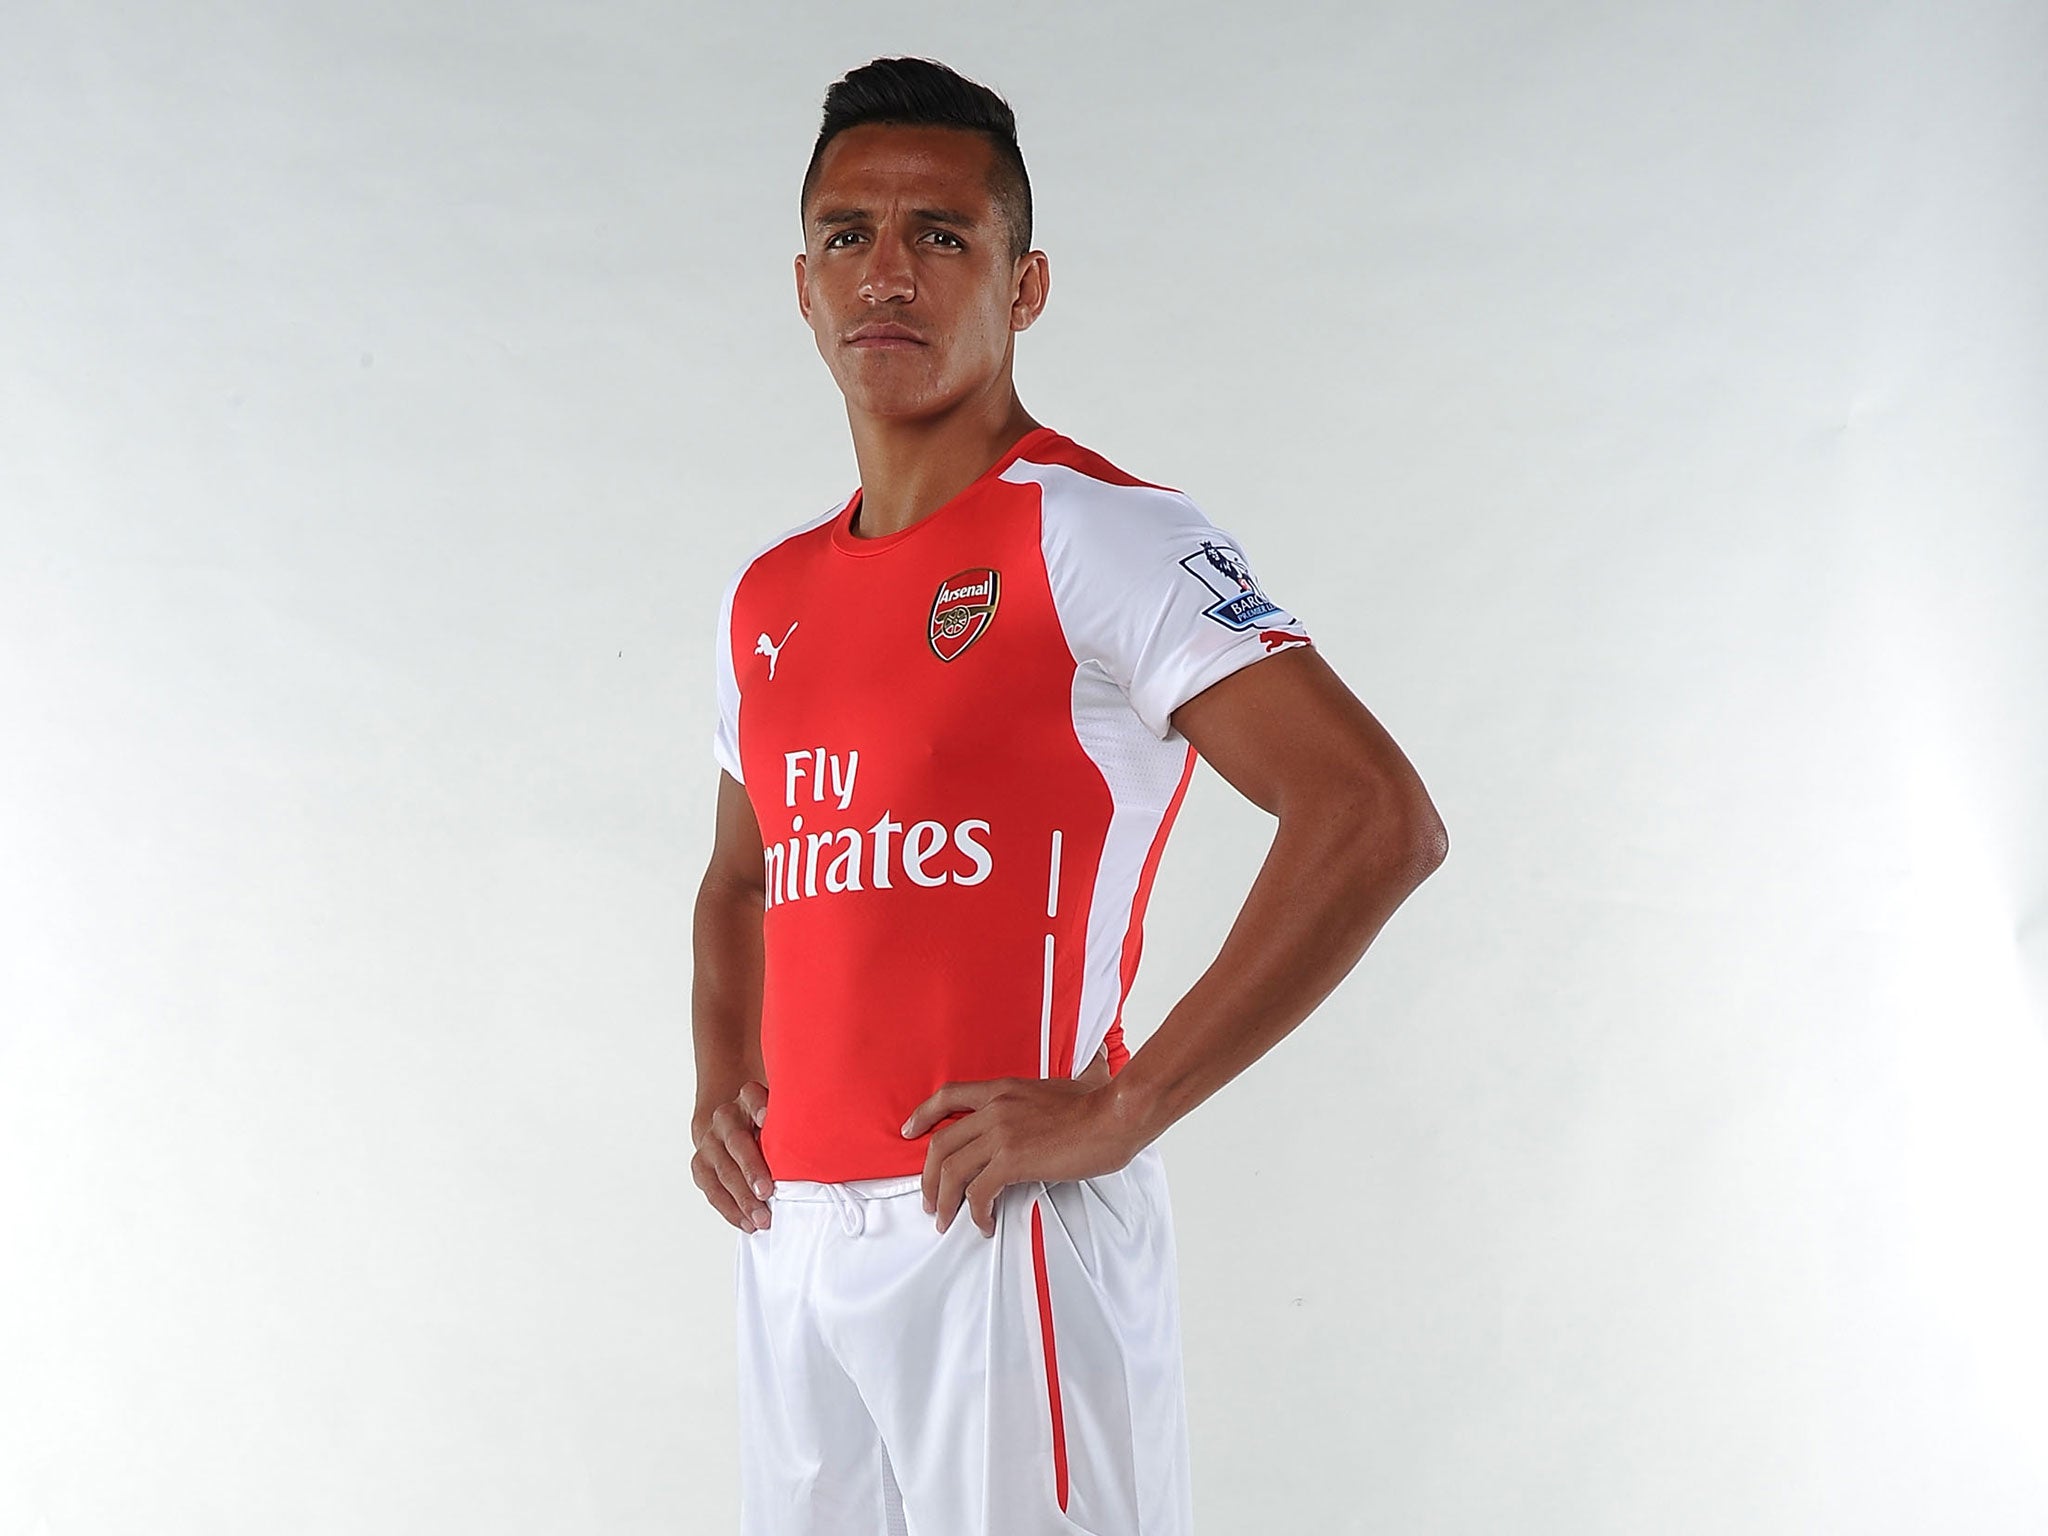 Alexis Sanchez was signed from Barcelona for £35million